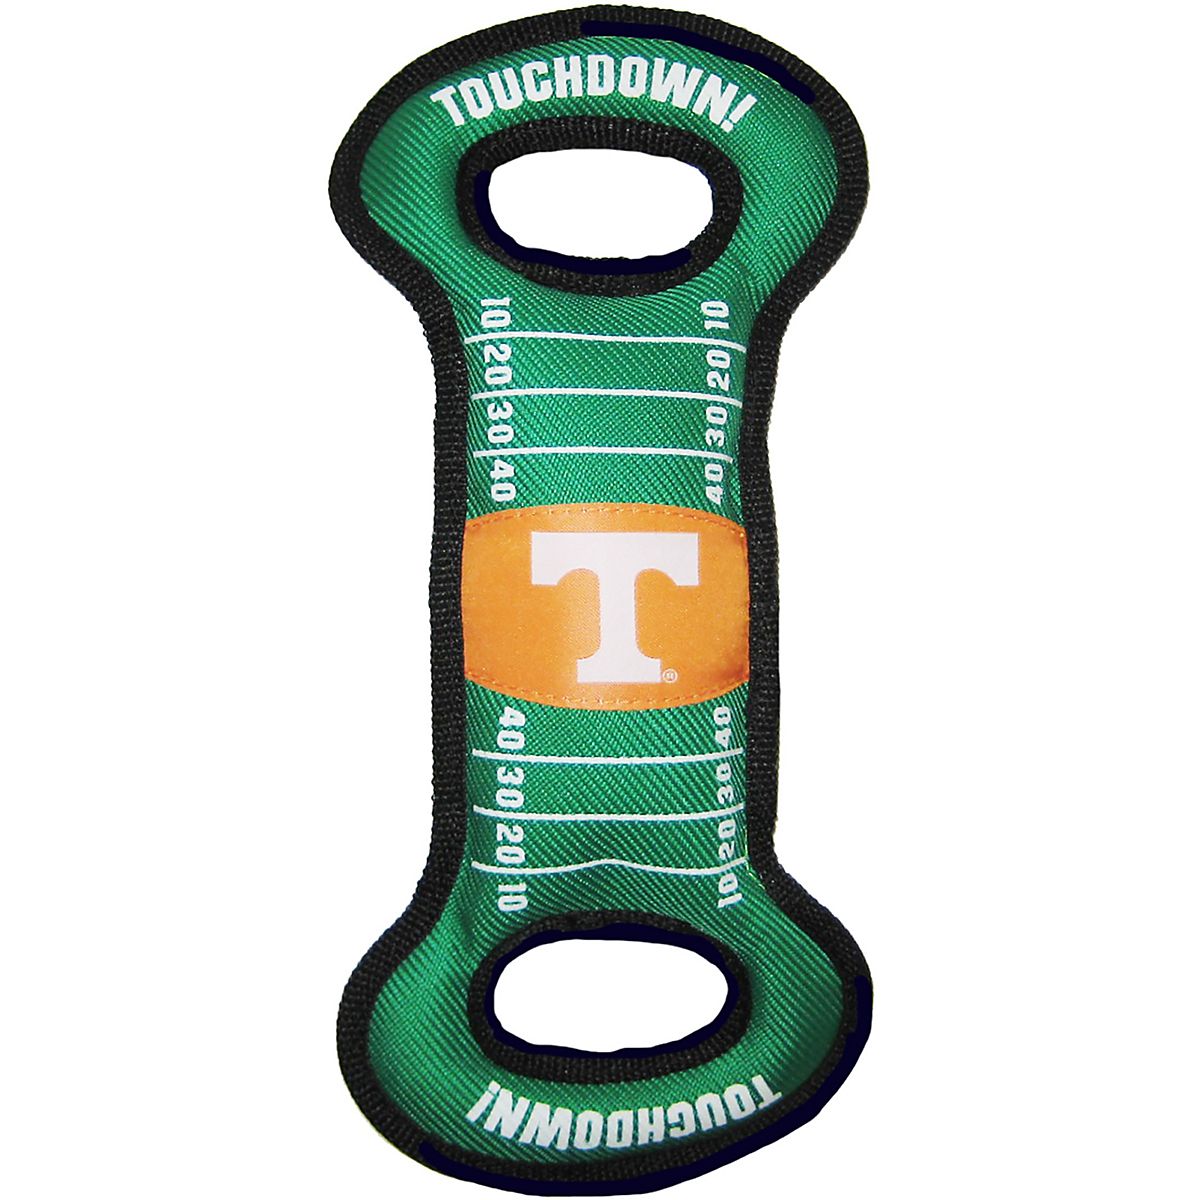 pets-first-university-of-tennessee-field-dog-toy-academy